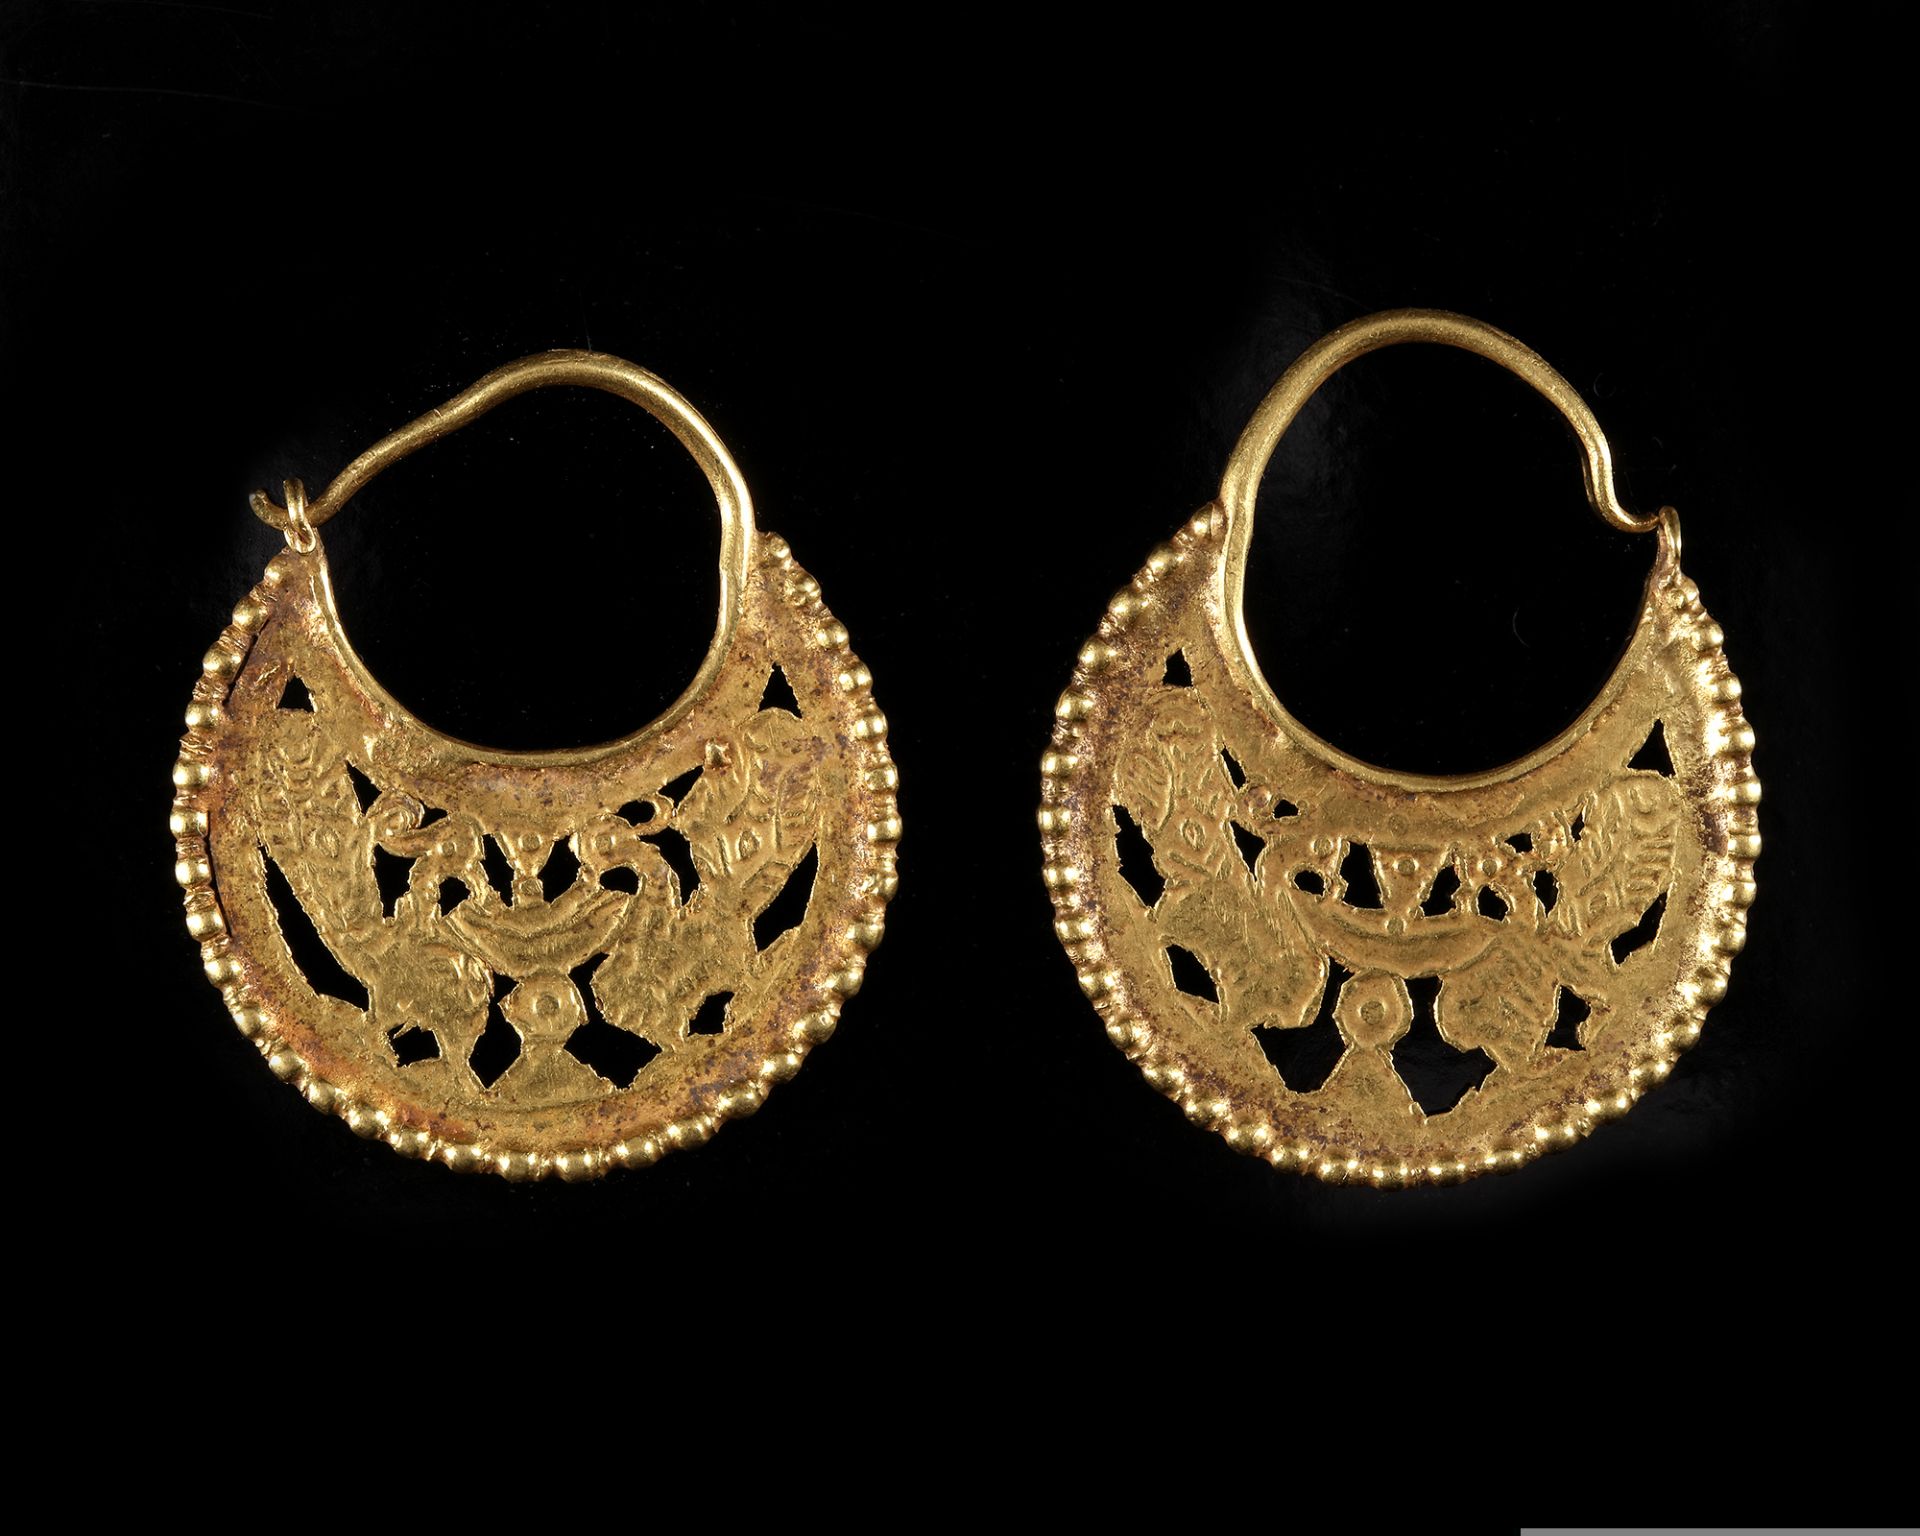 A PAIR OF FATIMID GOLD EARRINGS, EGYPT, 11TH CENTURY - Image 2 of 2